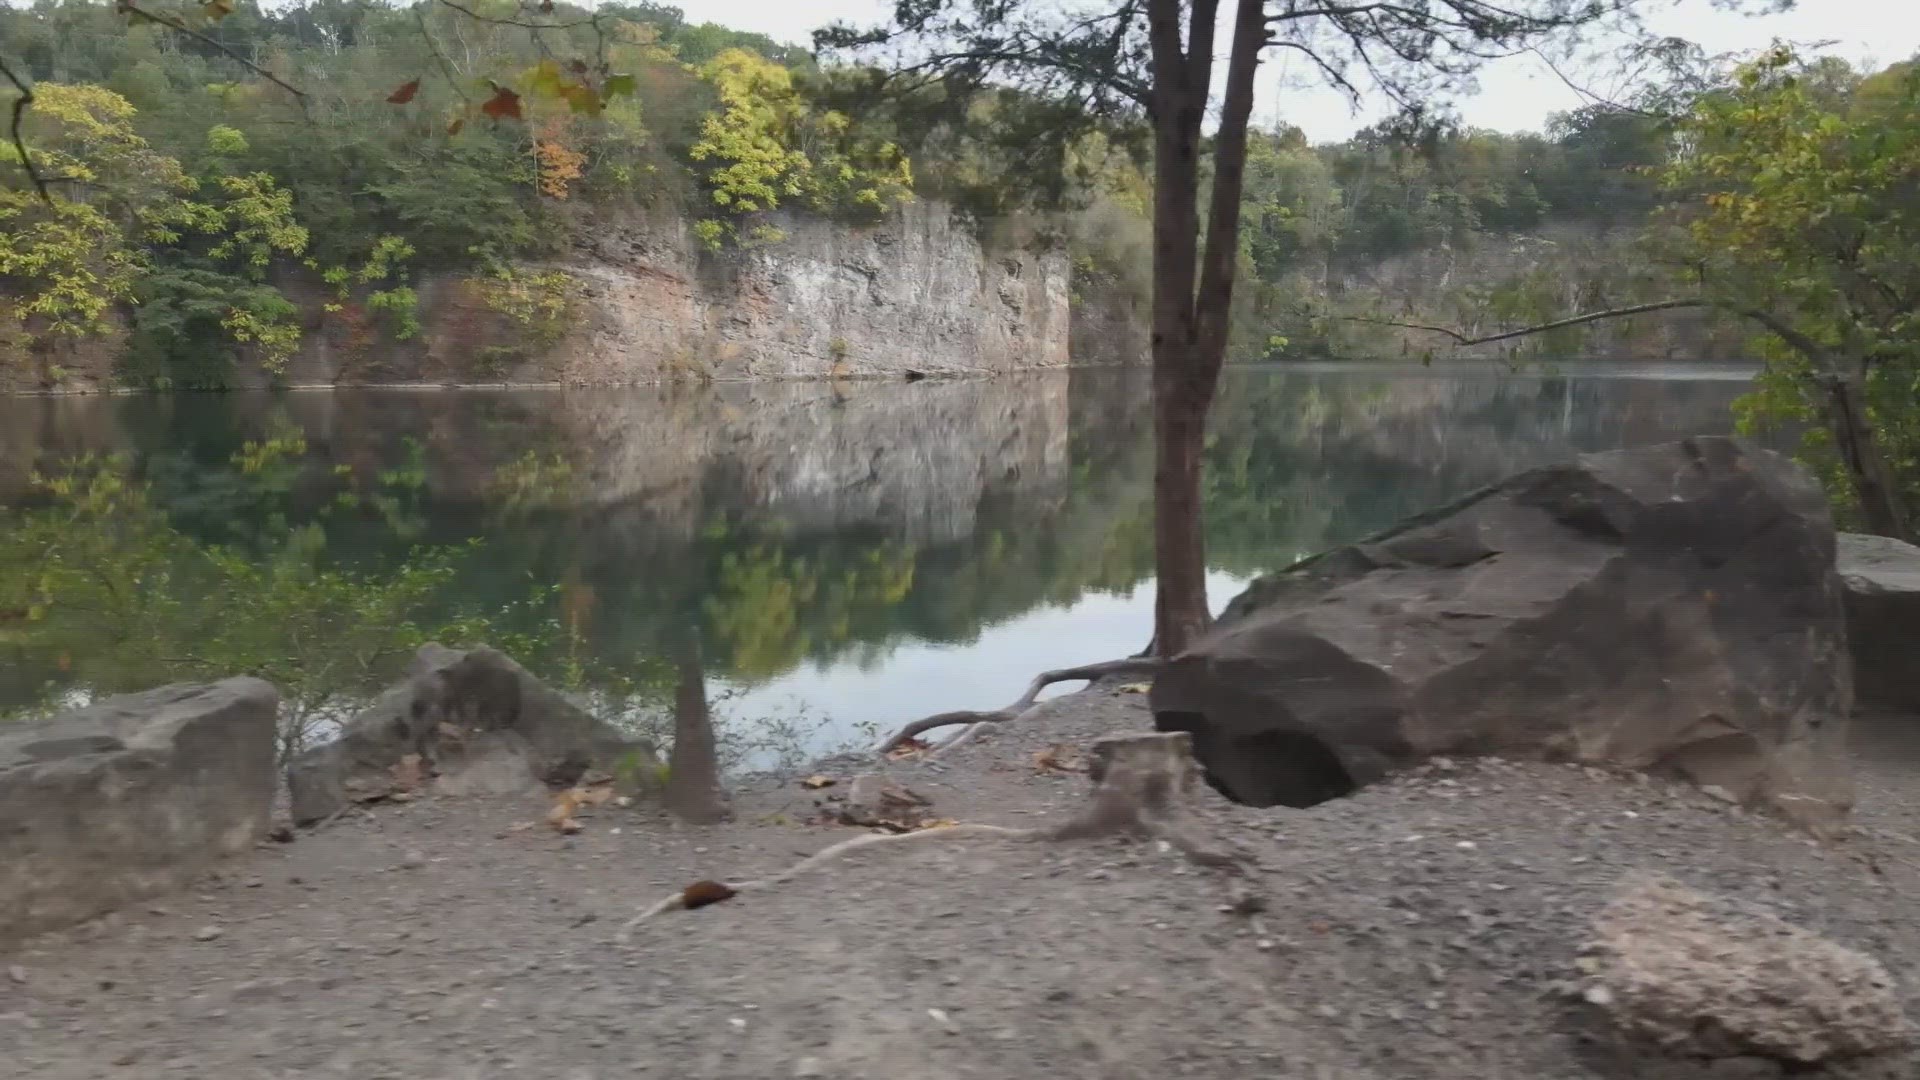 Crews are also expected to build an expanded overlook and a new floating swim platform towards the center of the quarry.